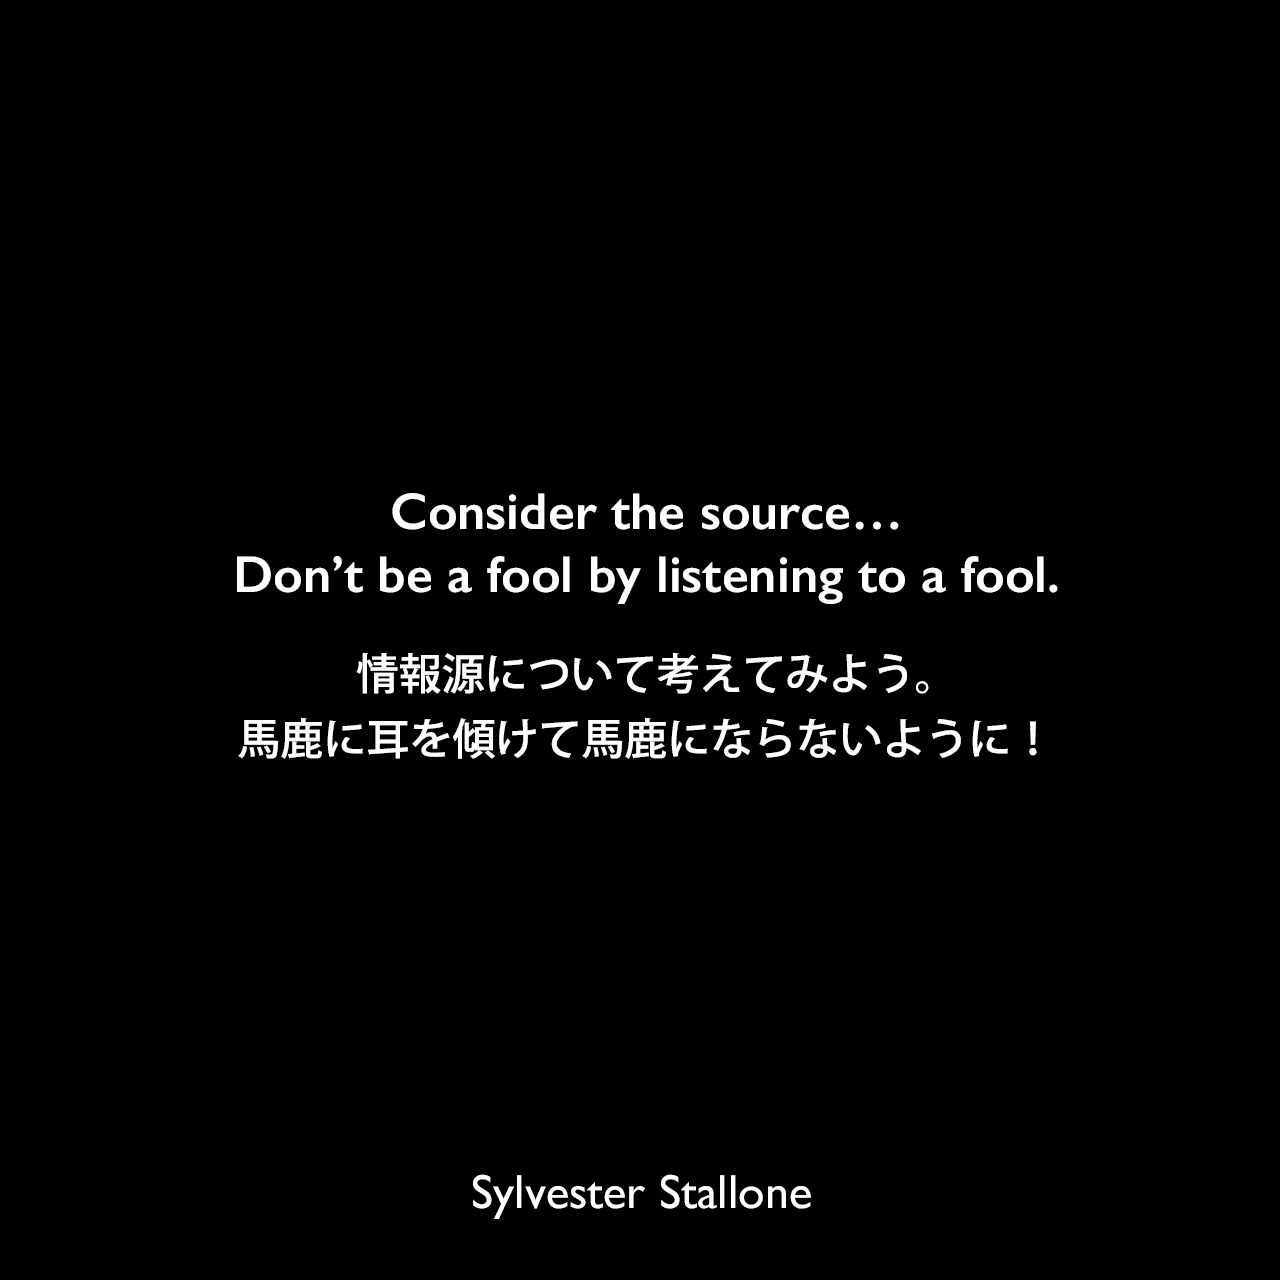 Consider the source…Don’t be a fool by listening to a fool.情報源について考えてみよう。馬鹿に耳を傾けて馬鹿にならないように！Sylvester Stallone